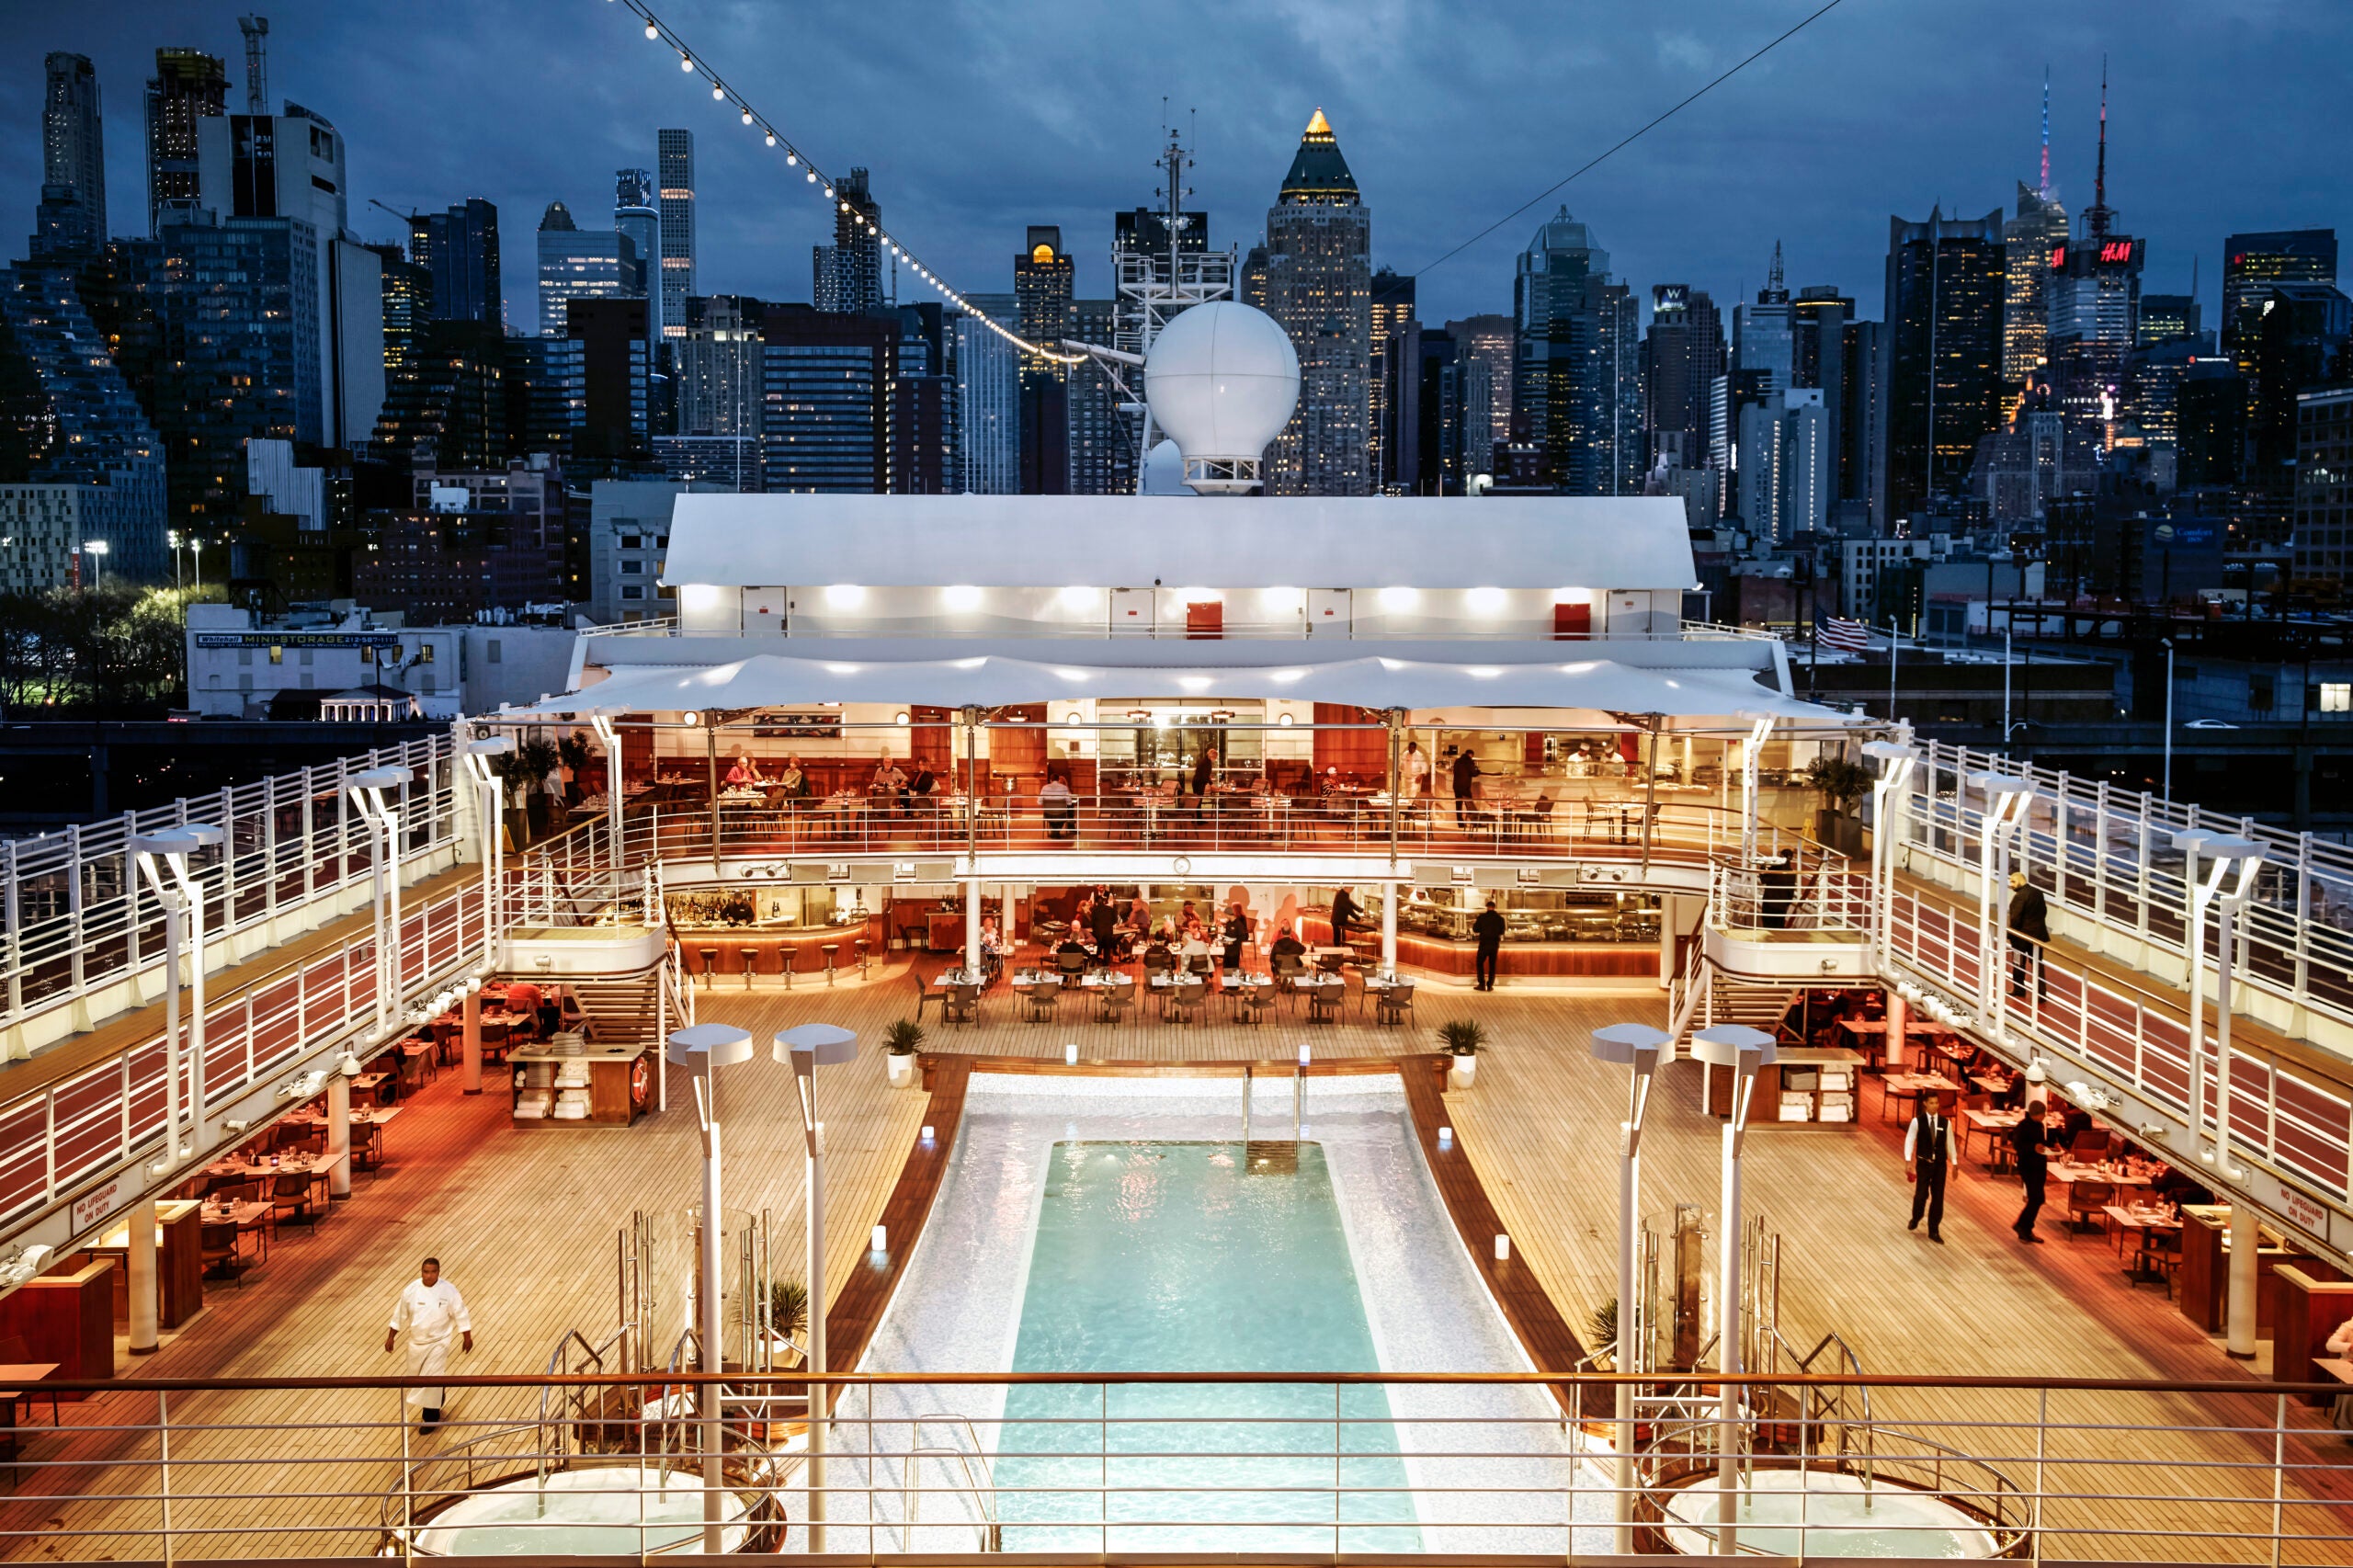 10 epic around-the-world cruises that will check off all your bucket list travel destinations